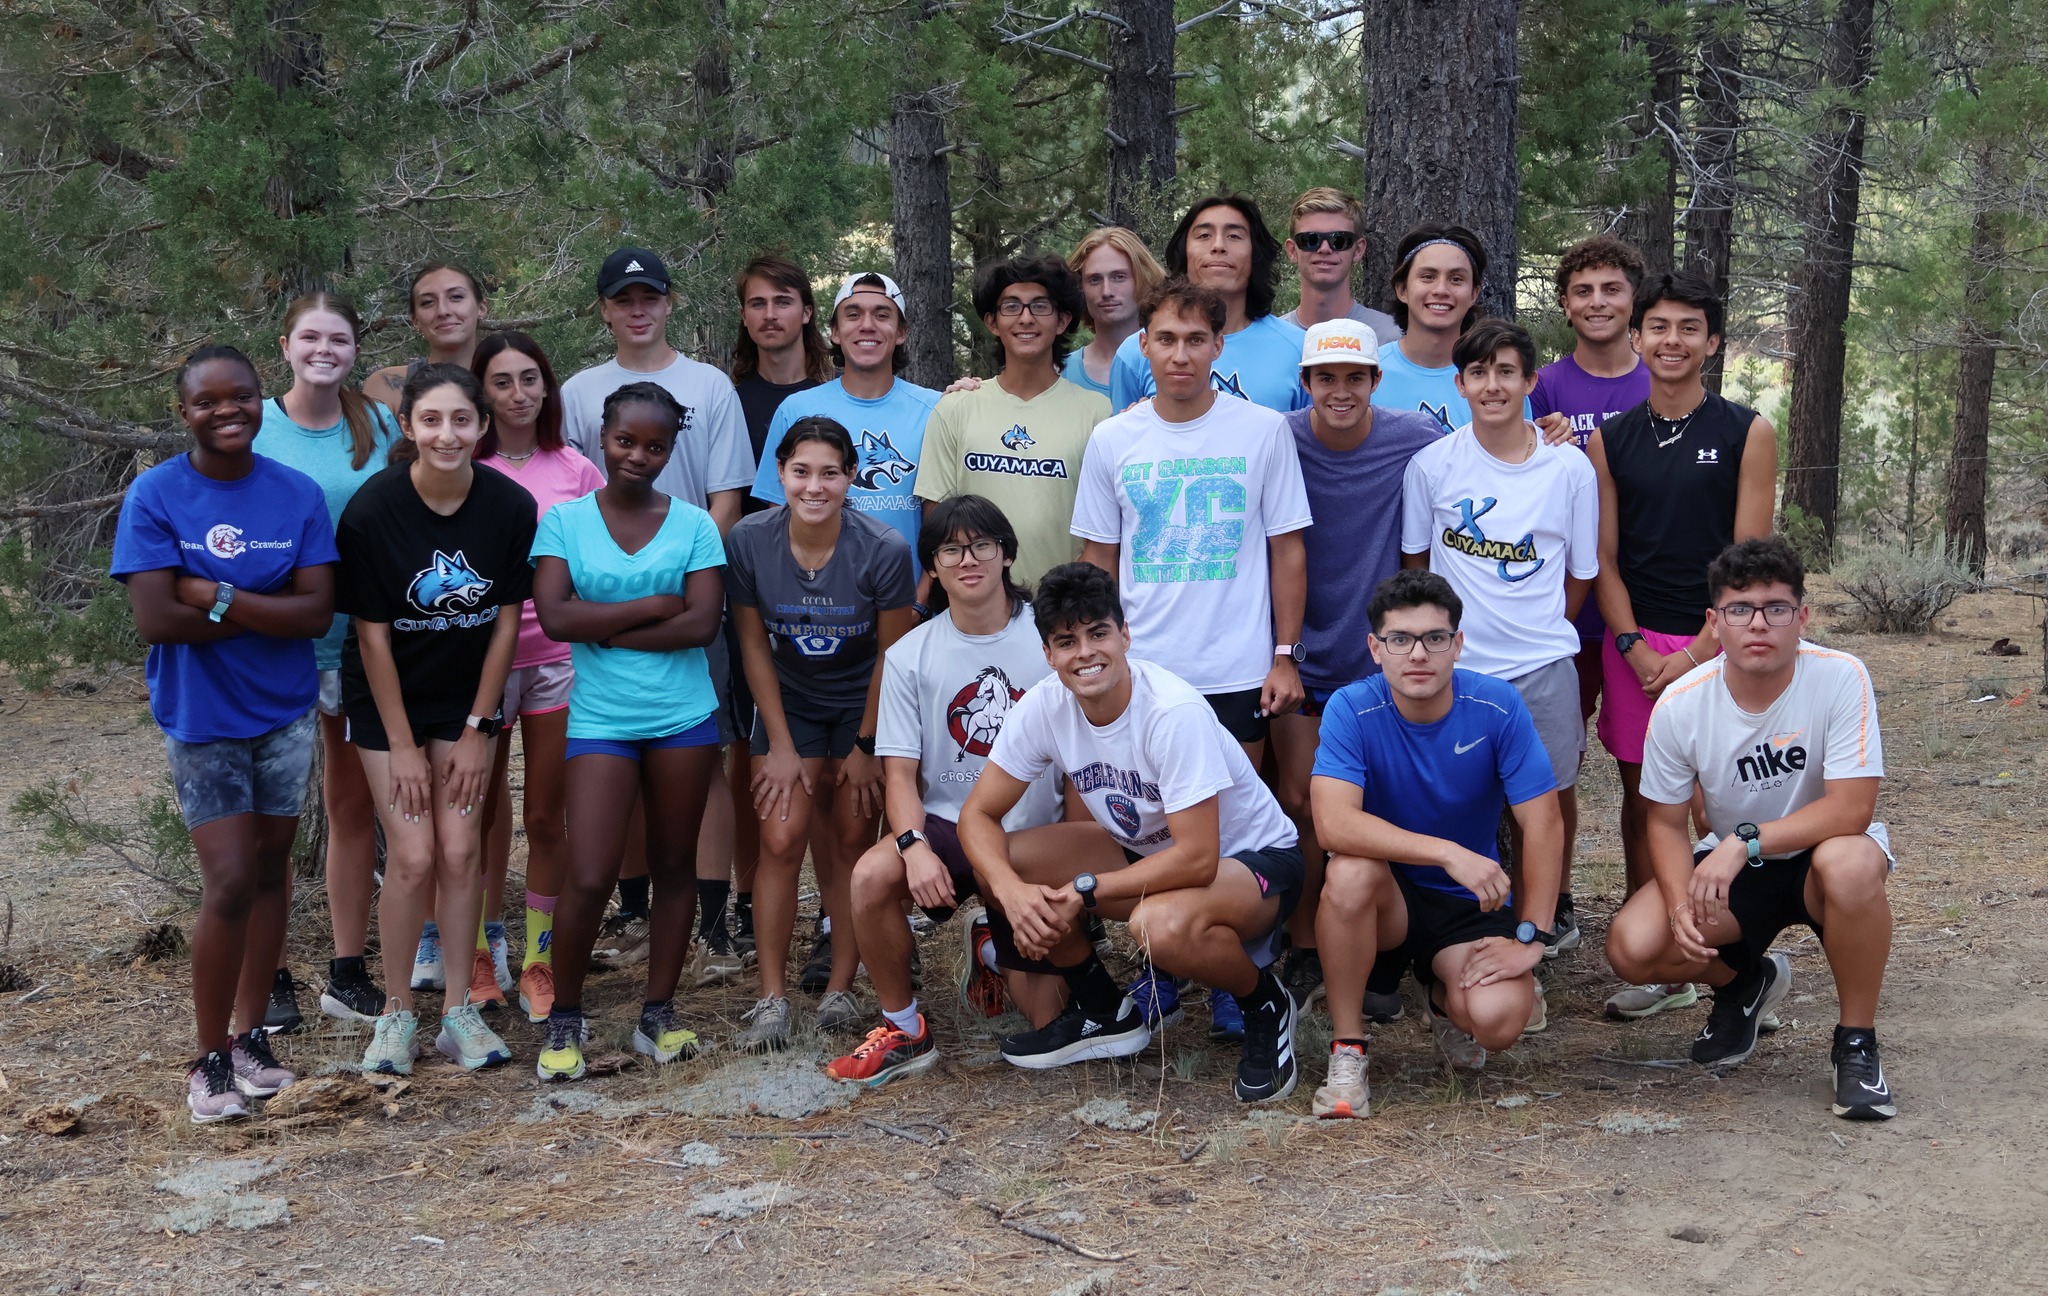 Cuyamaca XC heads to mountains for team building and altitude training